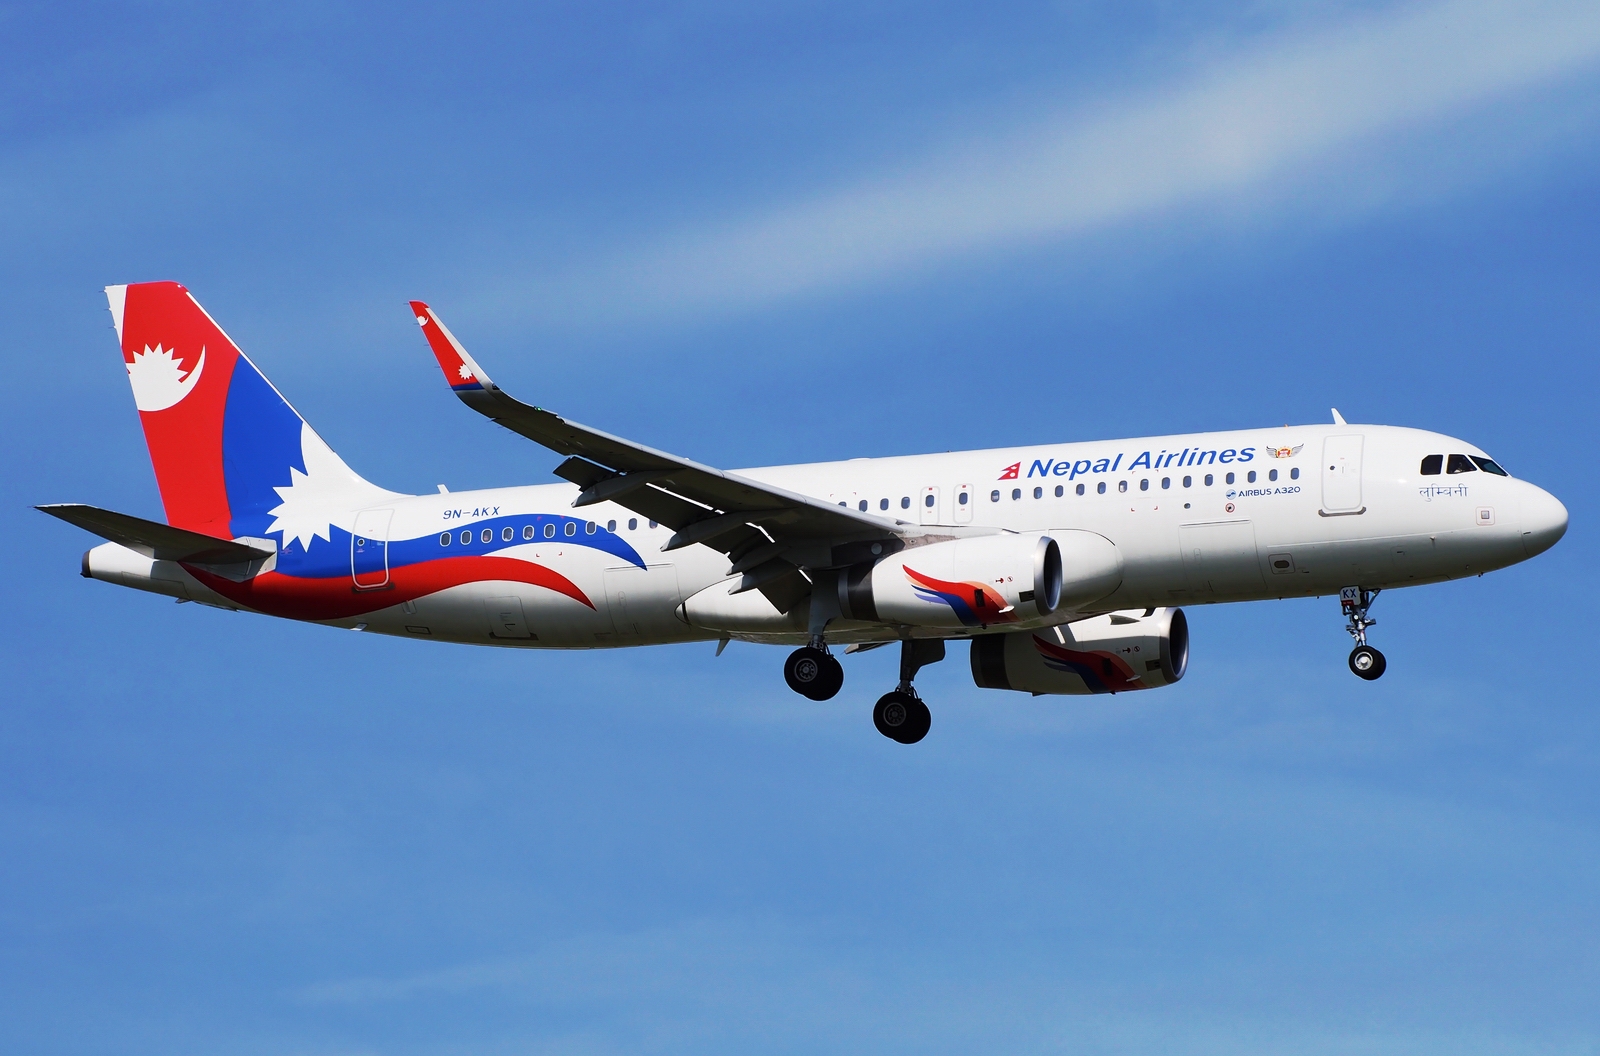 Qatar Airways proposes management takeover of Nepal Airlines Corporation amid financial crisis